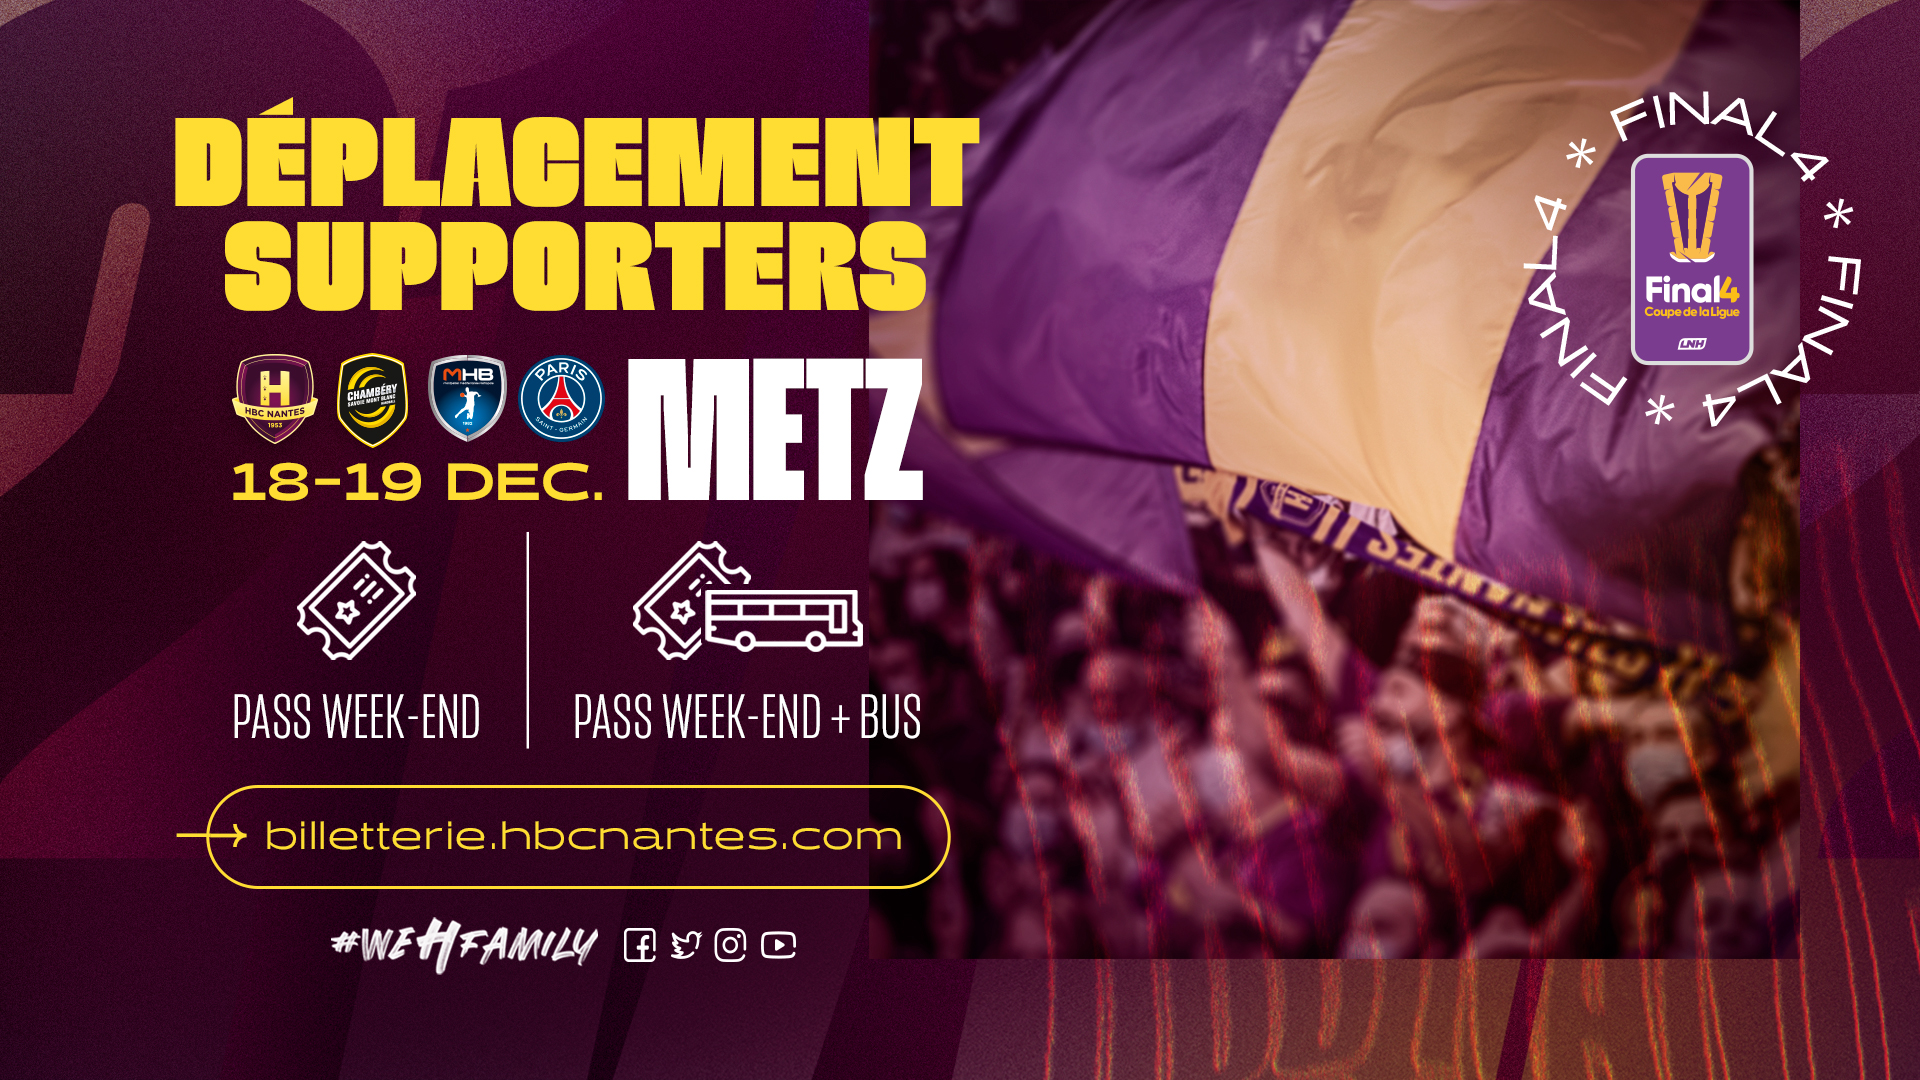 Déplacement supporters Final 4 Metz